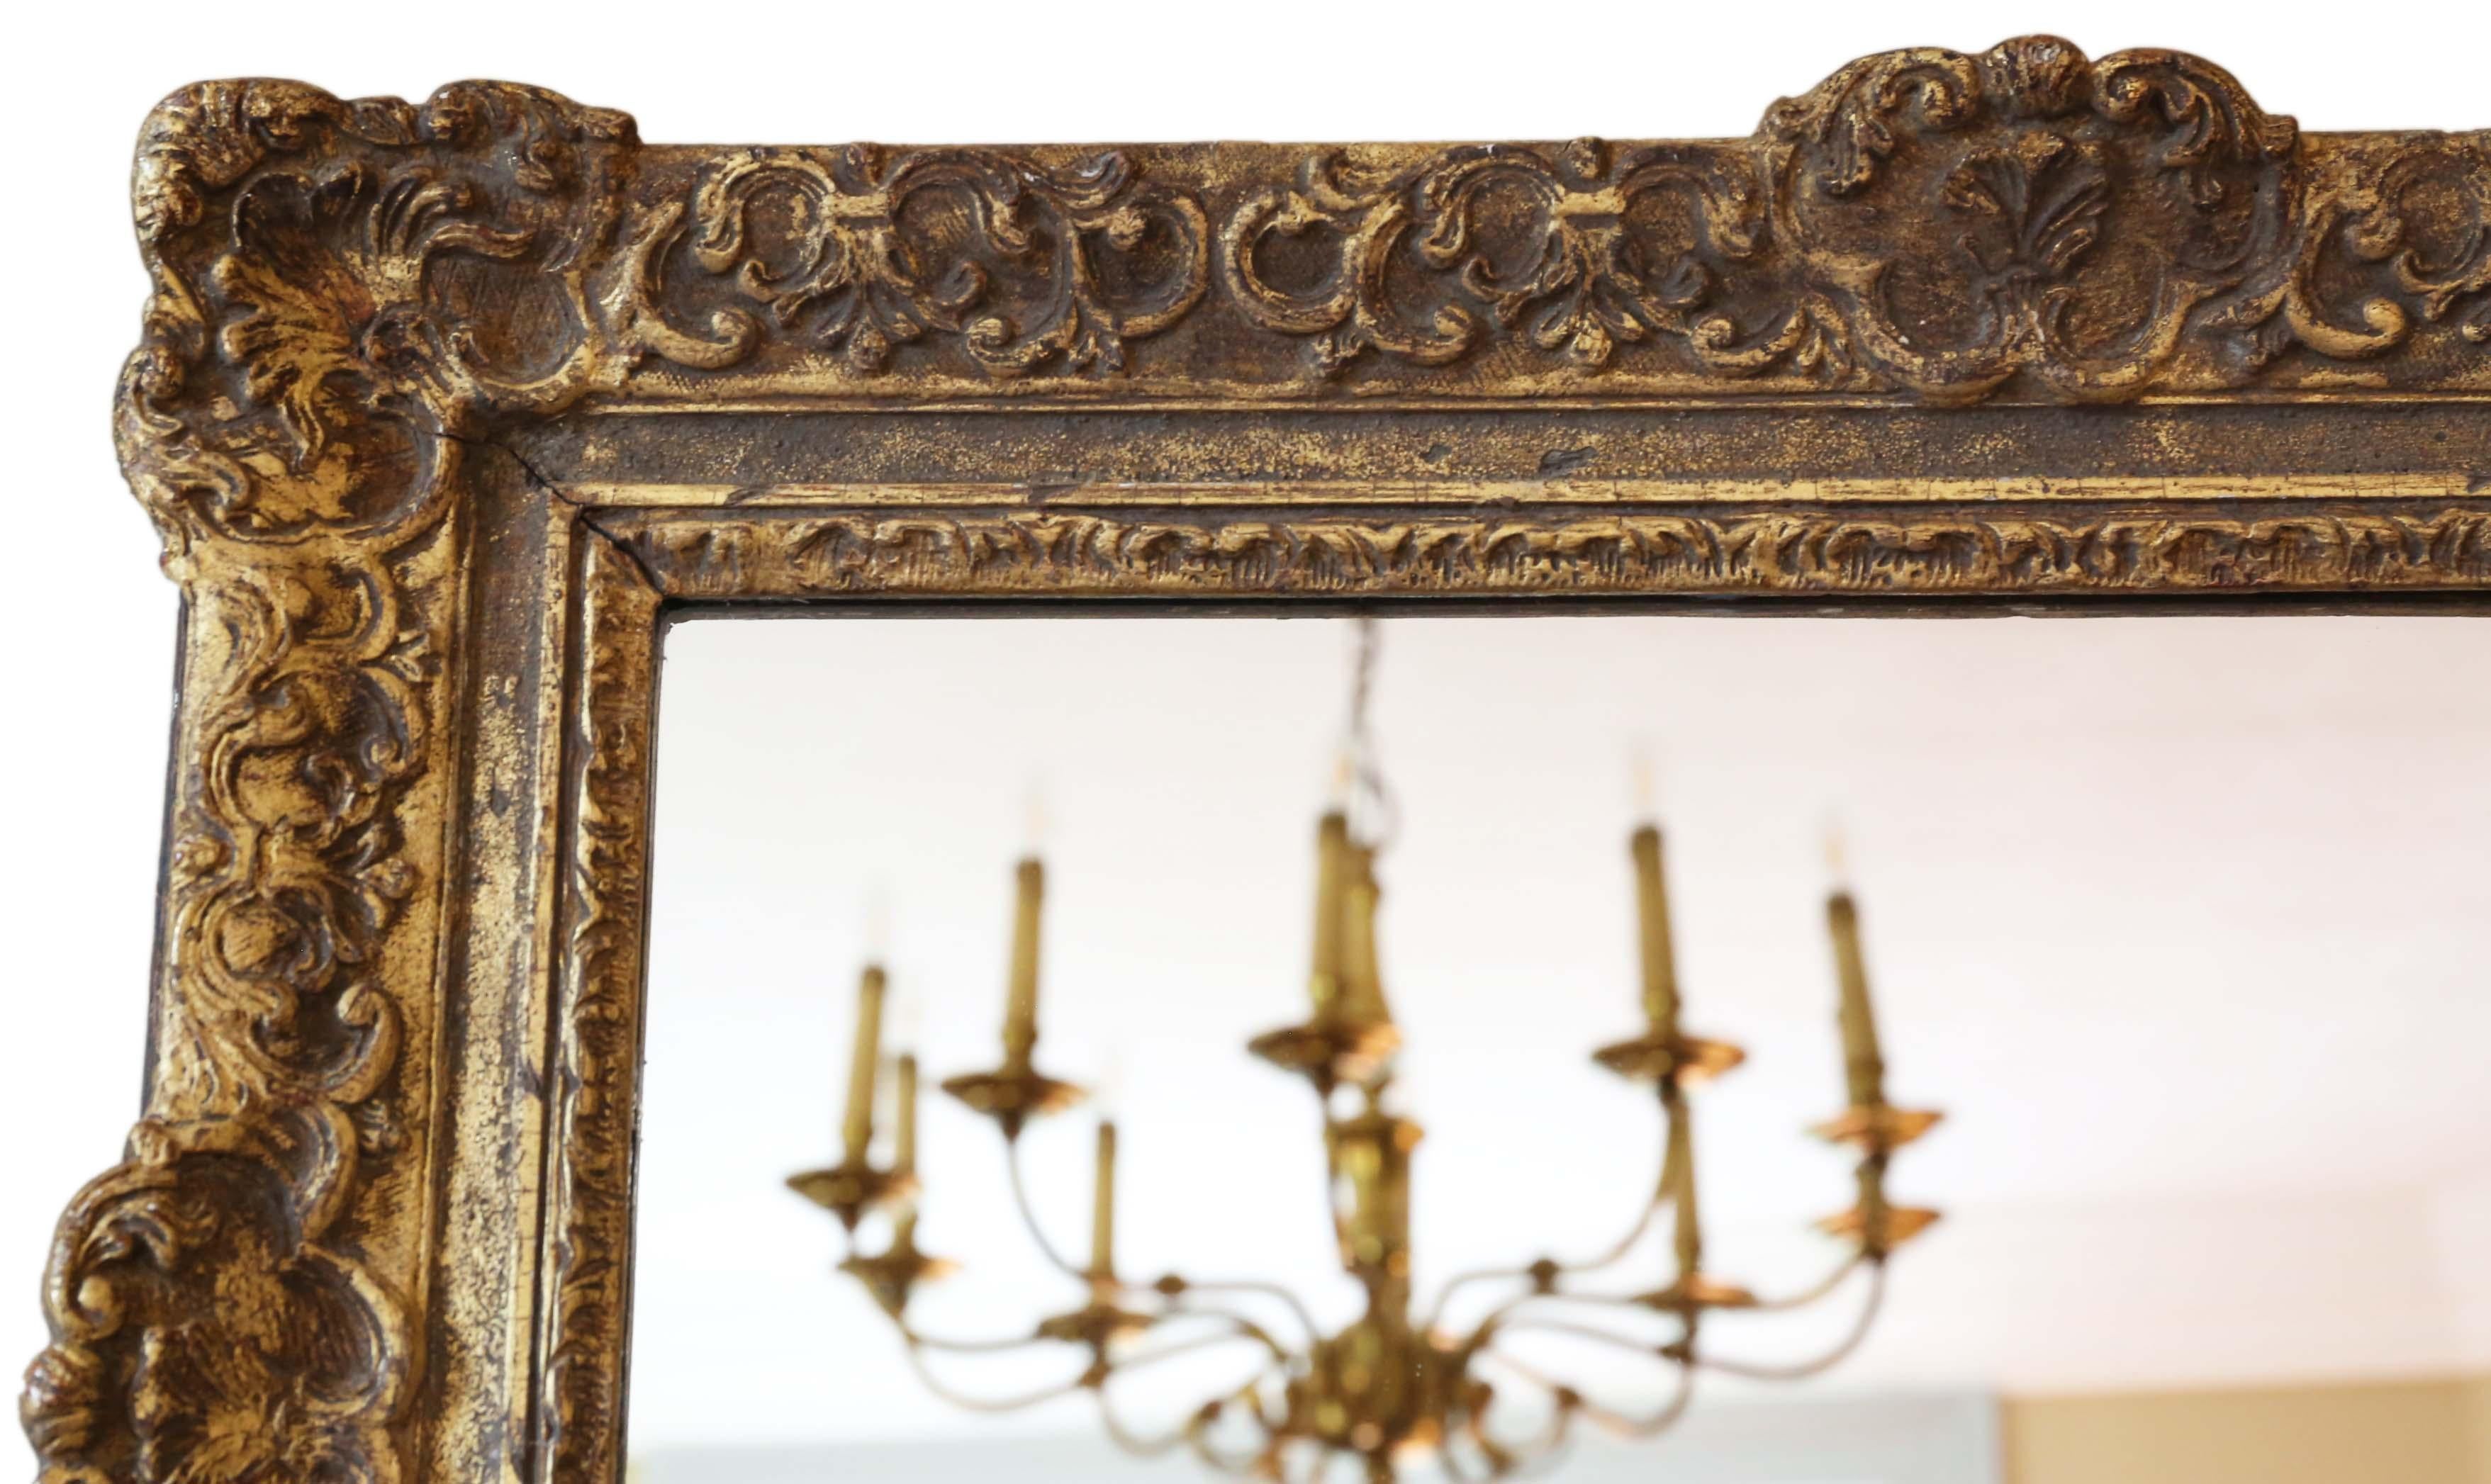 Antique large quality 19th century gilt overmantle or wall mirror. A great look.
A charming mirror, that is full of age and character. Lovely frame with some losses touching up, refinishing and repairs over the years. Most of the original finish